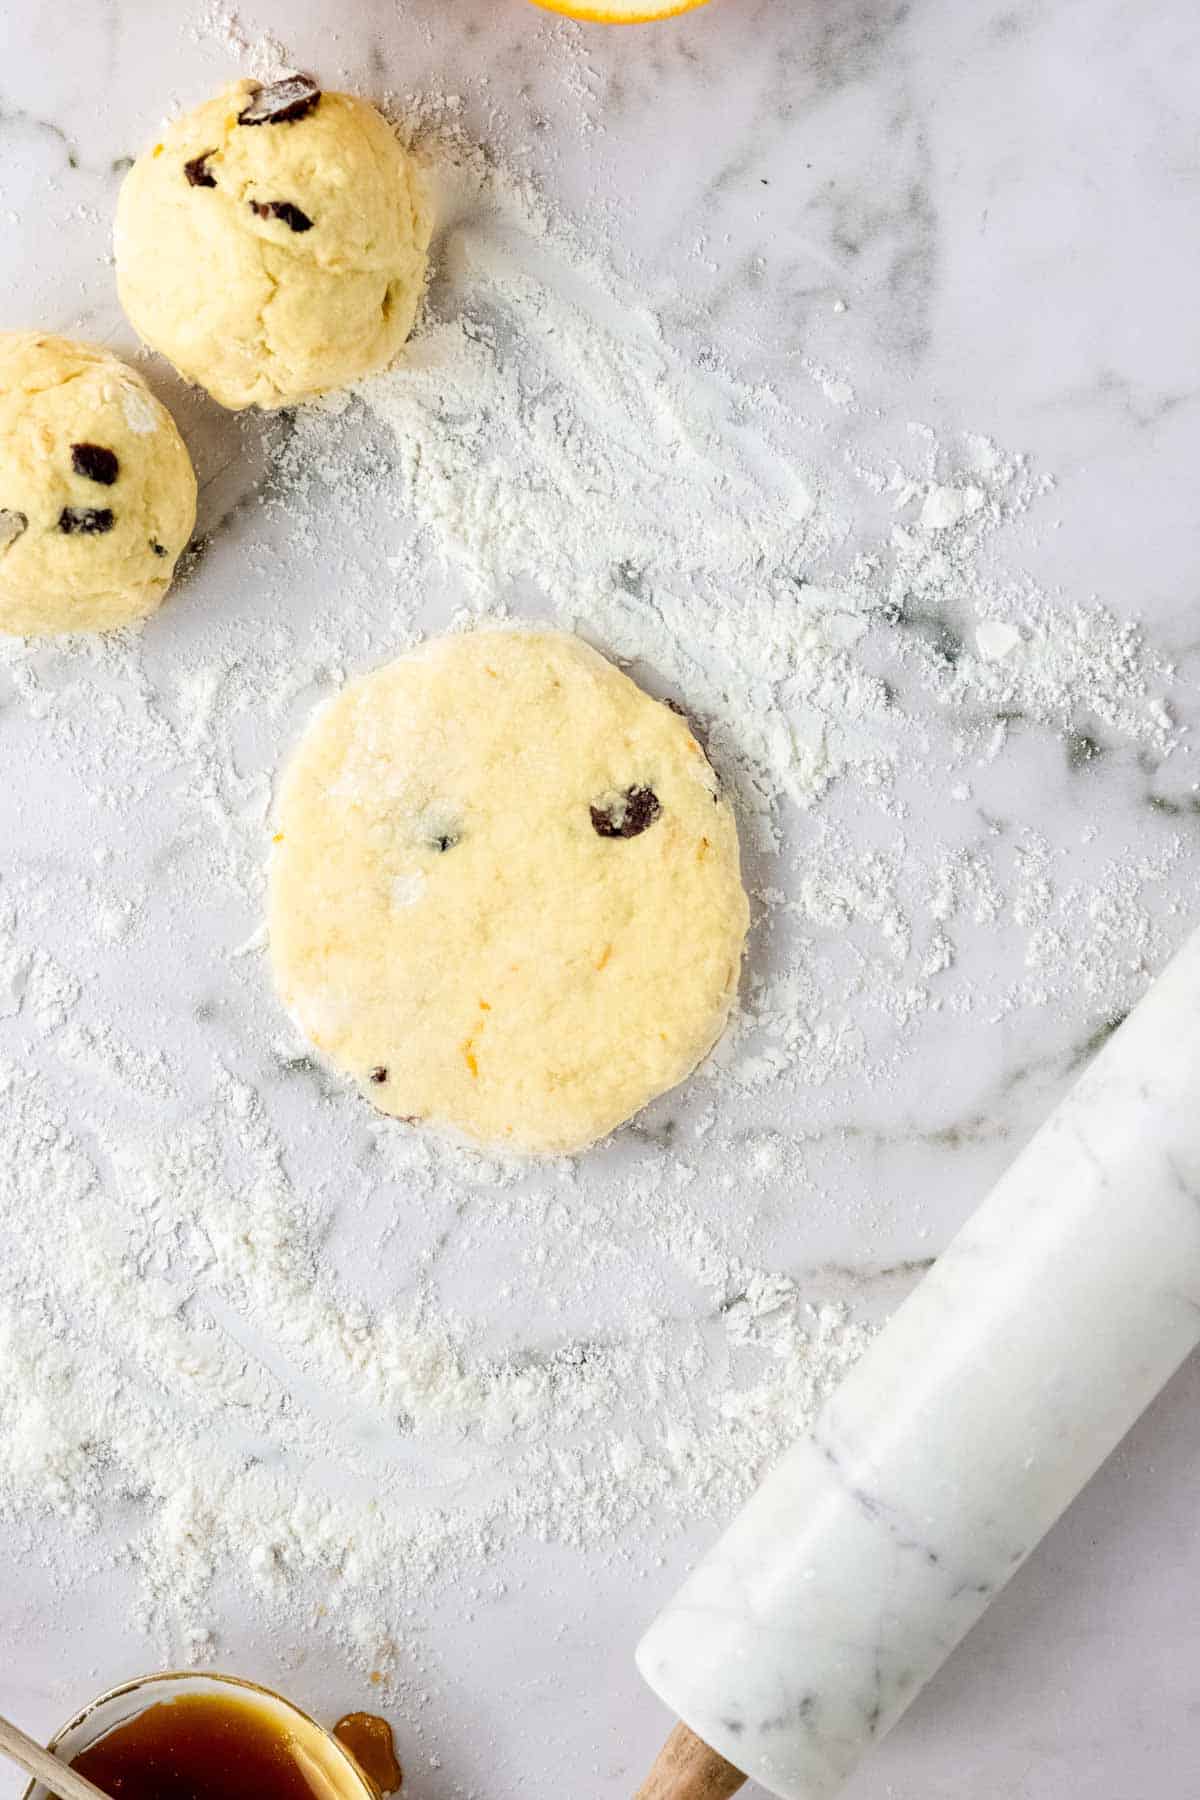 Cranberry orange pita bread dough is rolled into discs on a floured marble countertop.